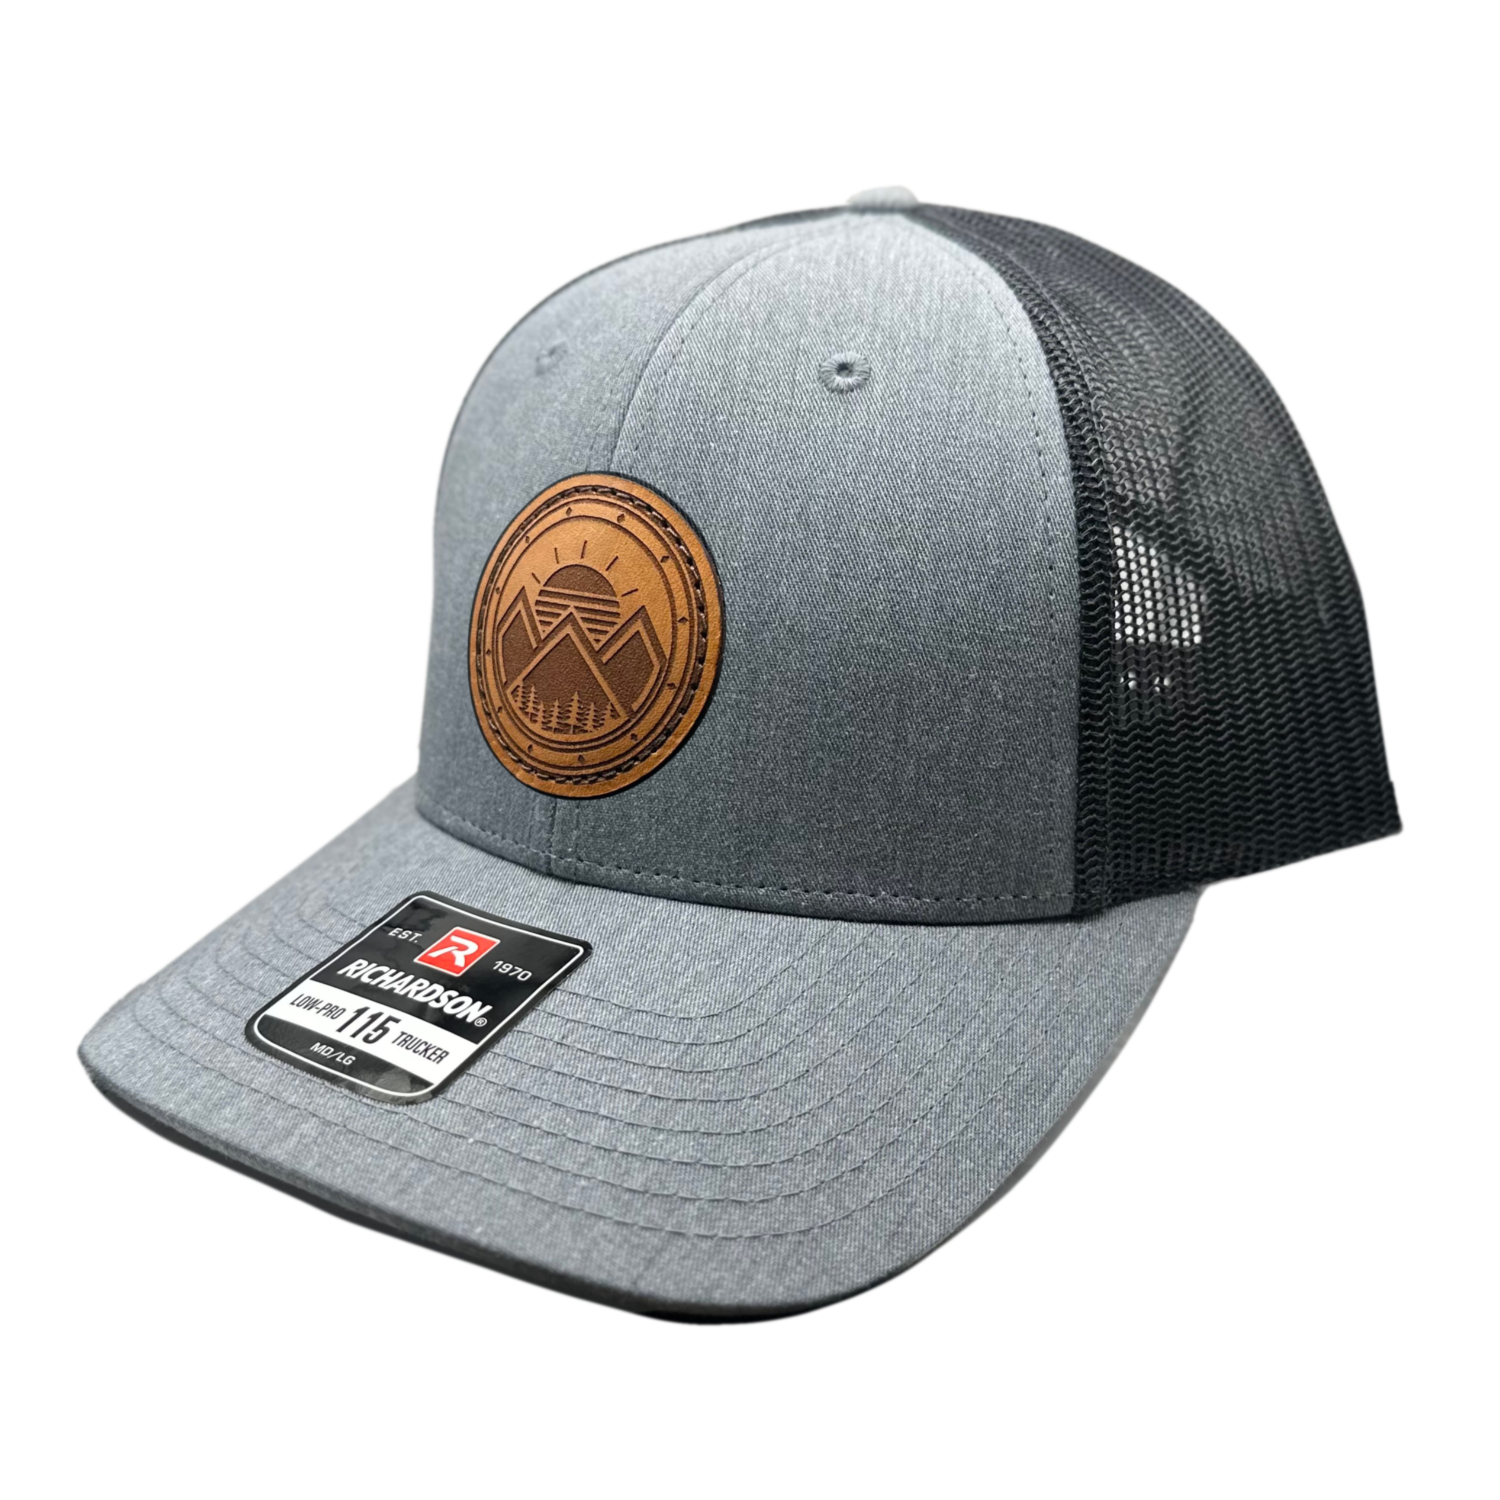 A trendy leather patch hat named Modern Mountains, boasting a unique design with three mountain peaks, a sunrise, pine trees, and a decorative border on a circular patch. Crafted and designed in the USA, this authentic leather patch is skillfully sewn onto a SnapBack adjustable hat. Offered in small and m/l sizes in the Richardson 115 style, as well as multiple colors in the Richardson 112. Inspired by the picturesque surroundings of our Colorado mountain location, this hat is perfect for fashion-forward in